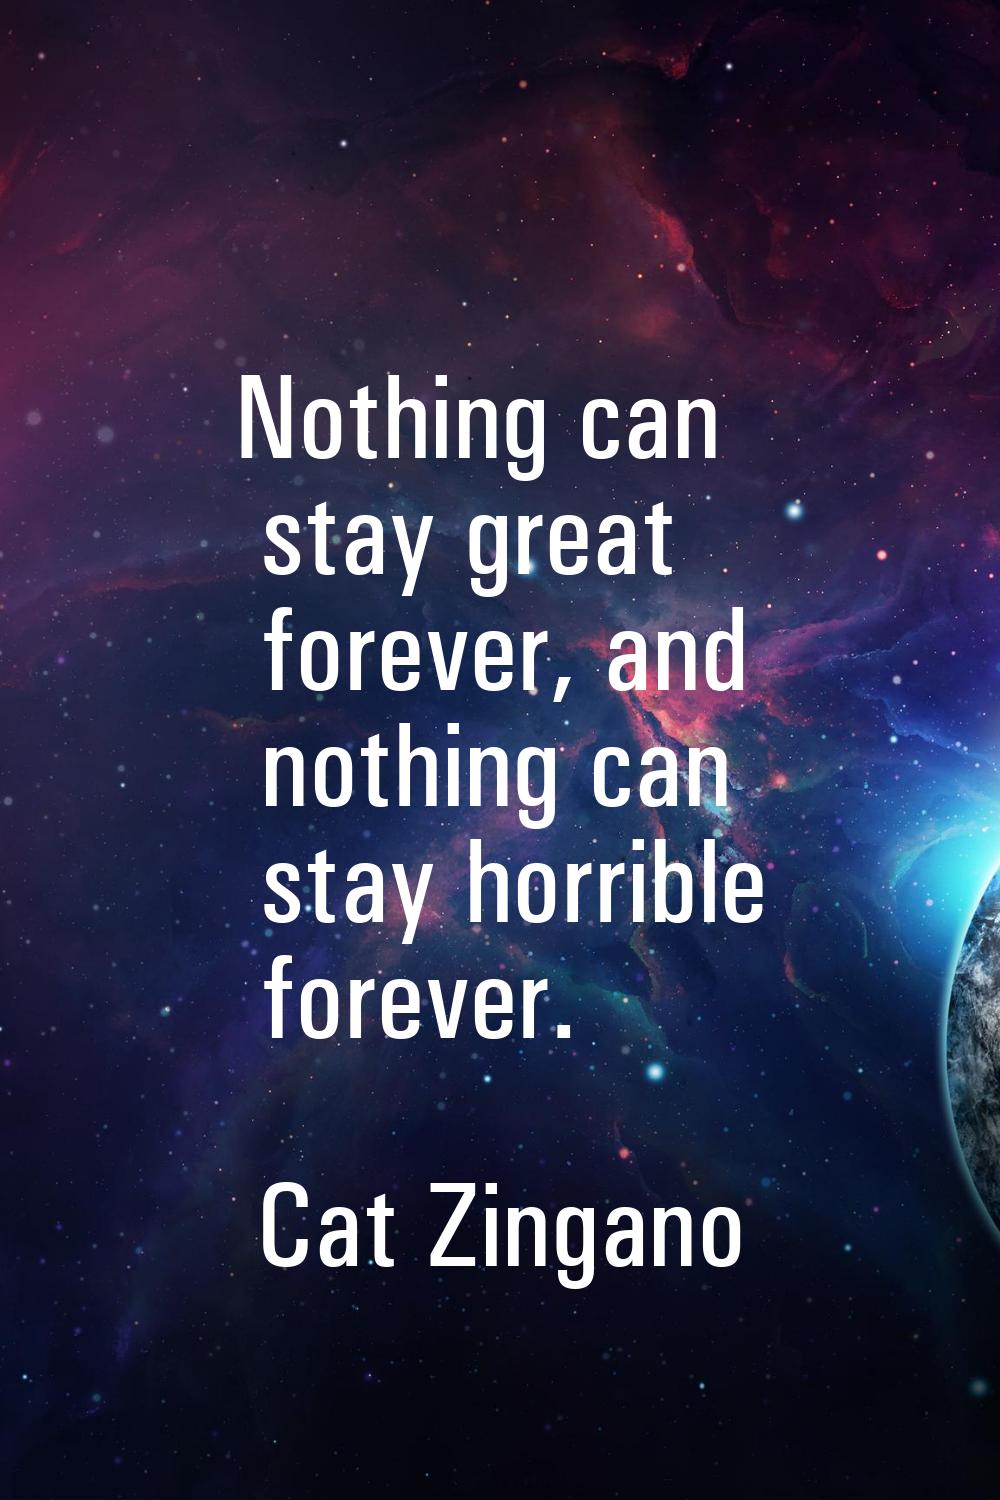 Nothing can stay great forever, and nothing can stay horrible forever.